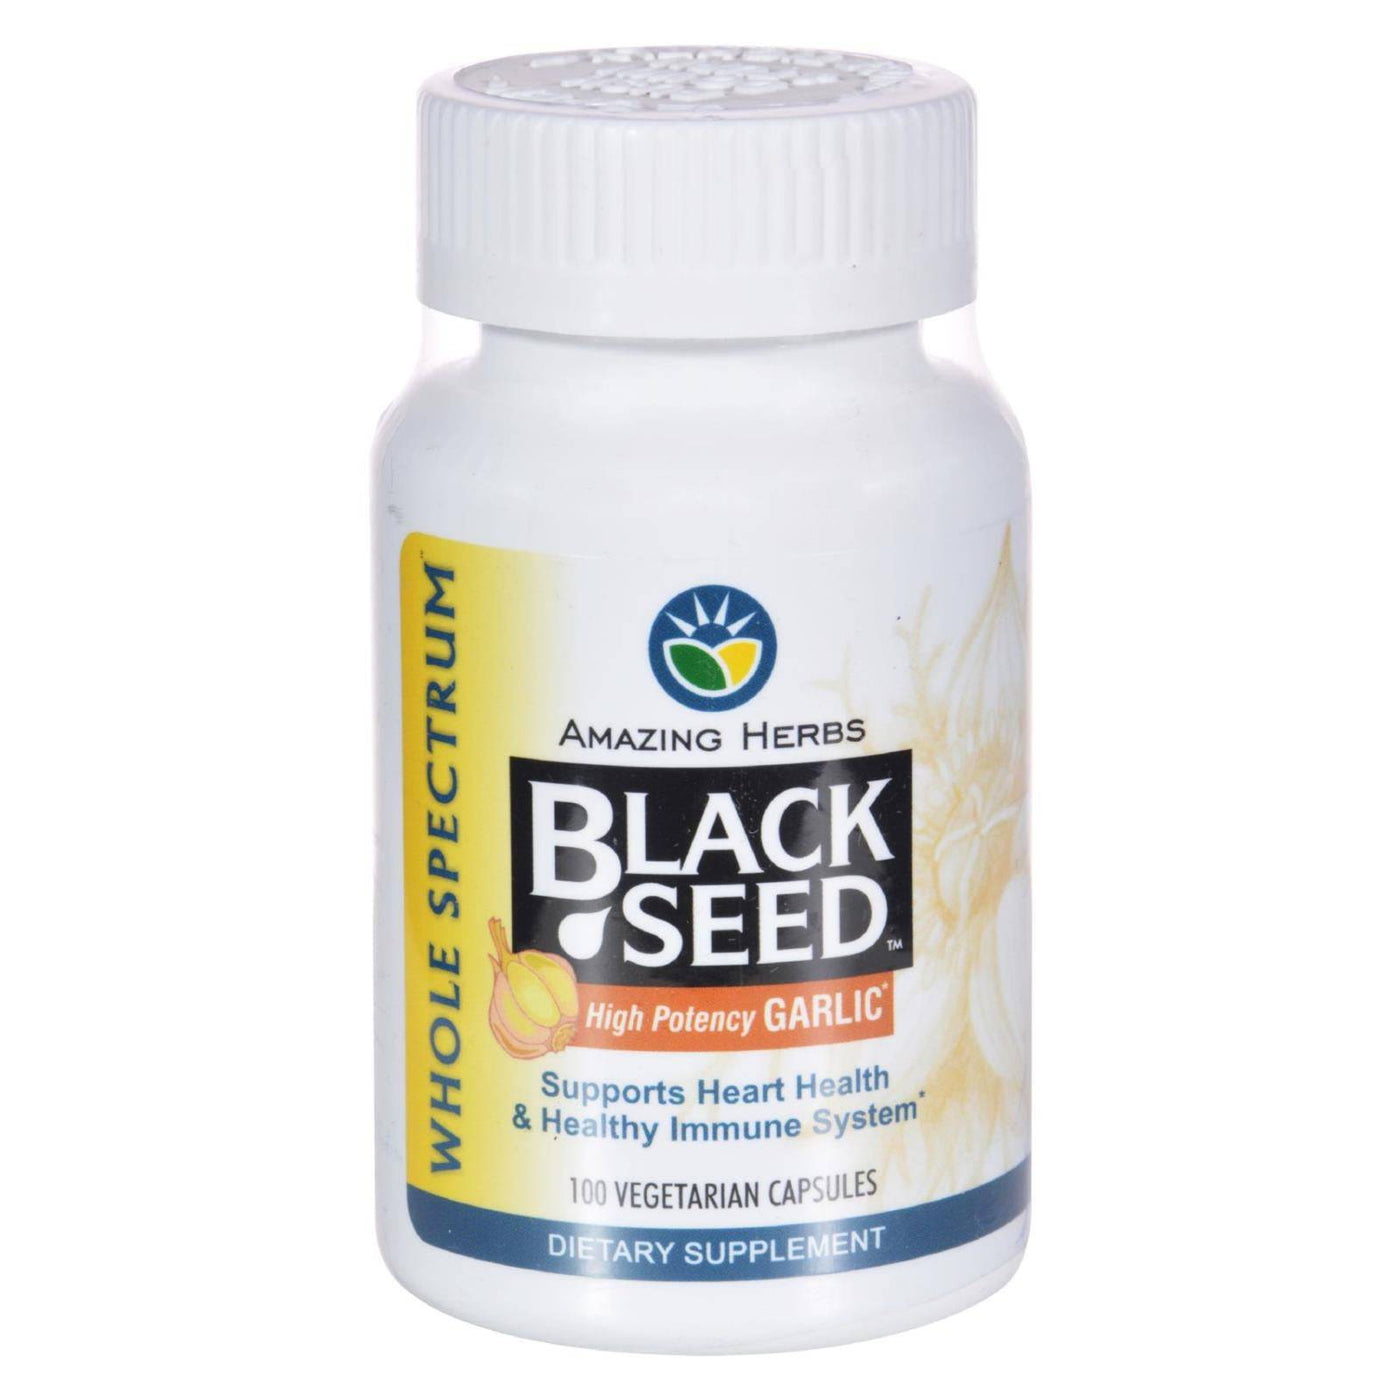 Amazing Herbs - Black Seed And Garlic - 100 Capsules | OnlyNaturals.us